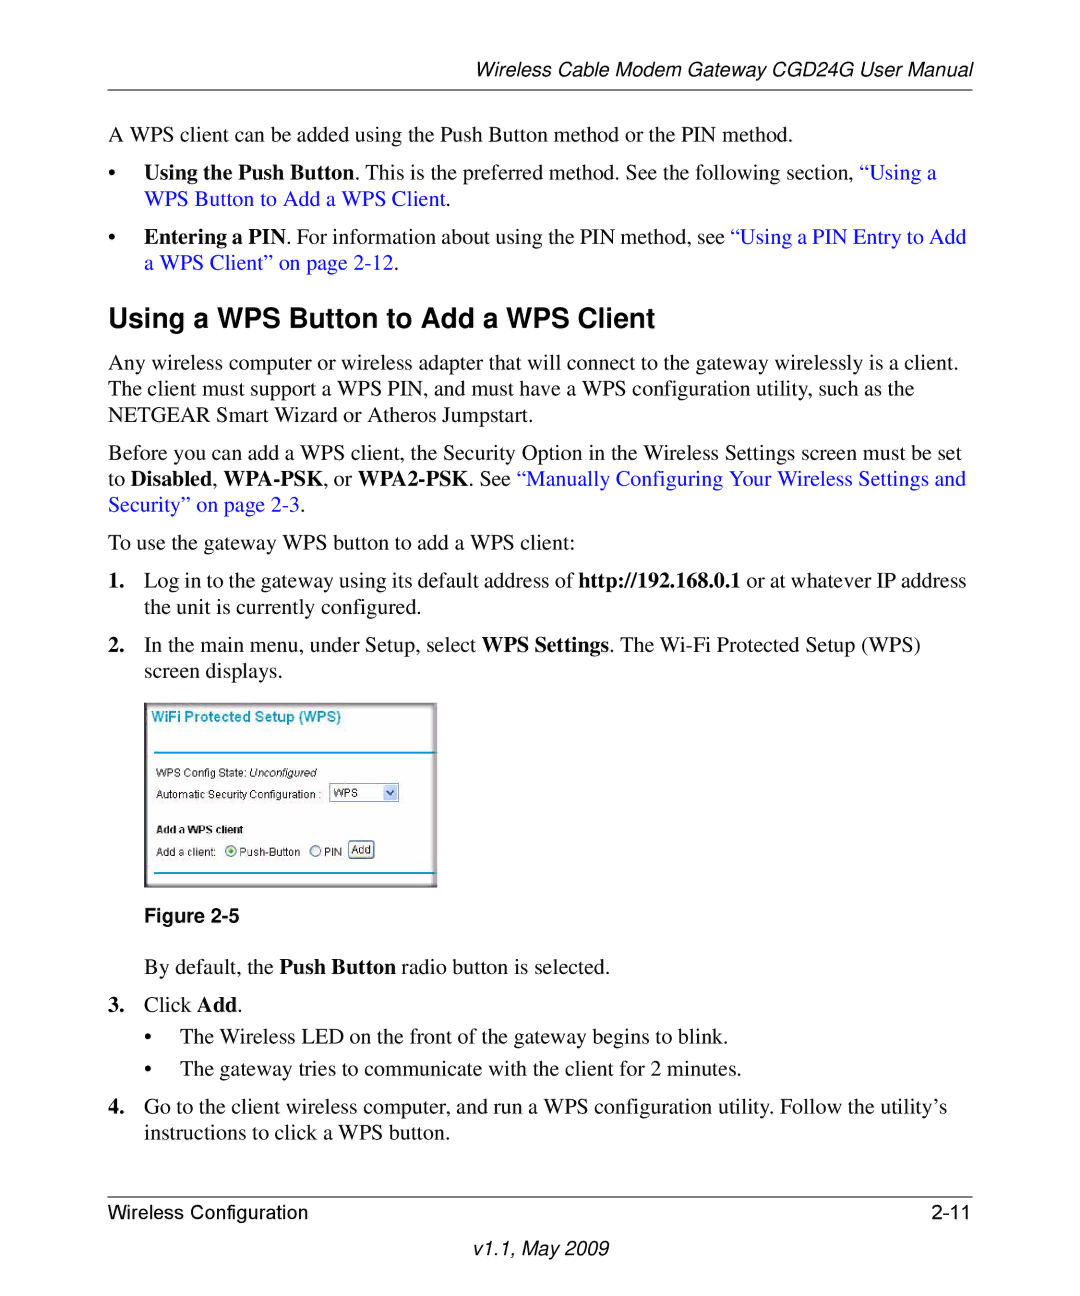 Gateway CGD24G user manual Using a WPS Button to Add a WPS Client 